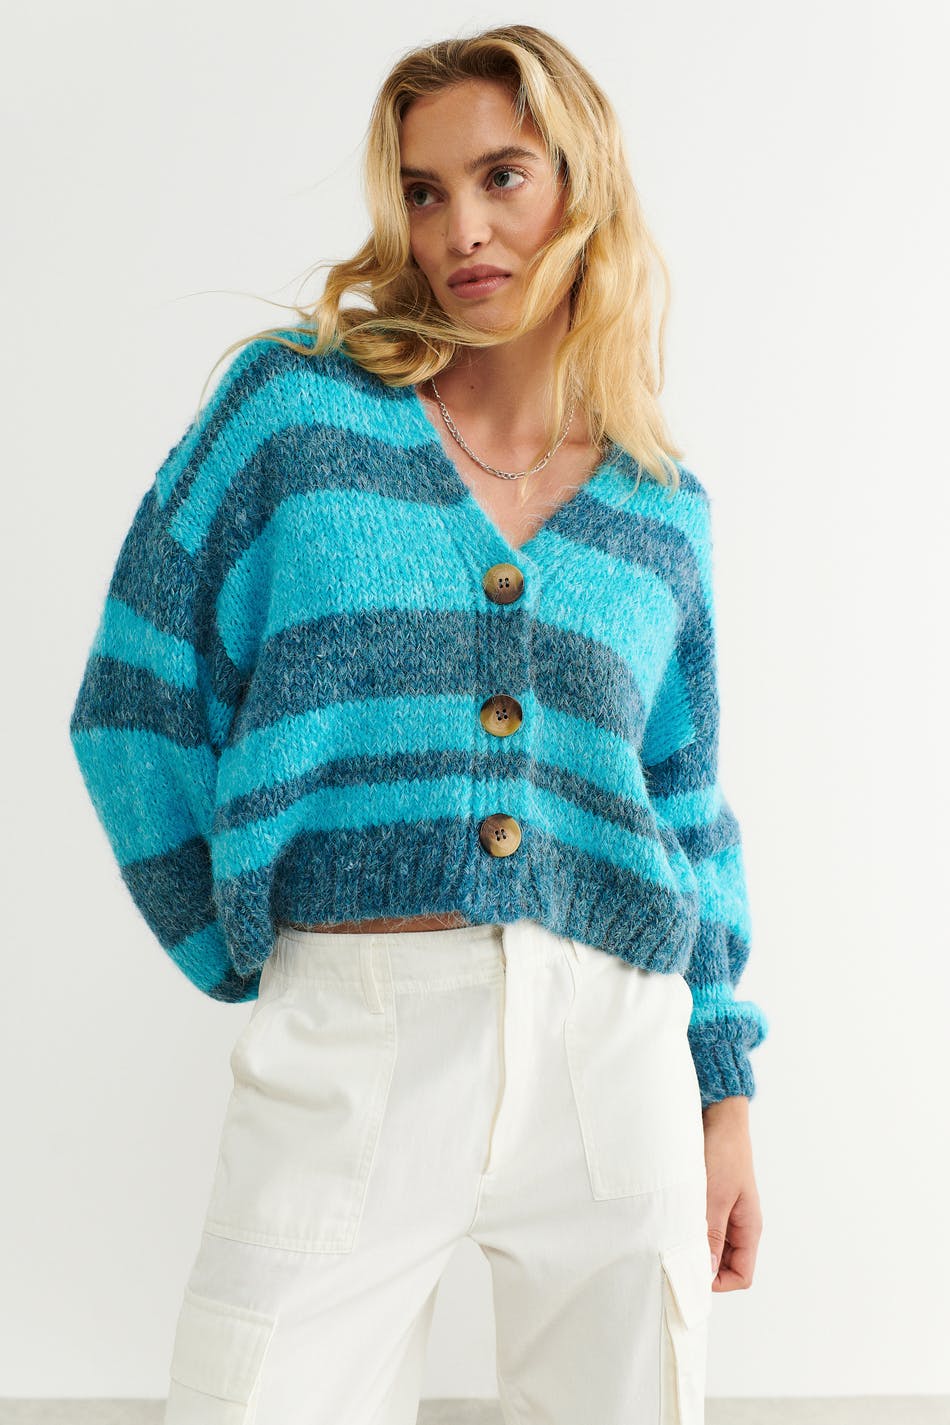 Alice knitted cardigan, Gina Tricot